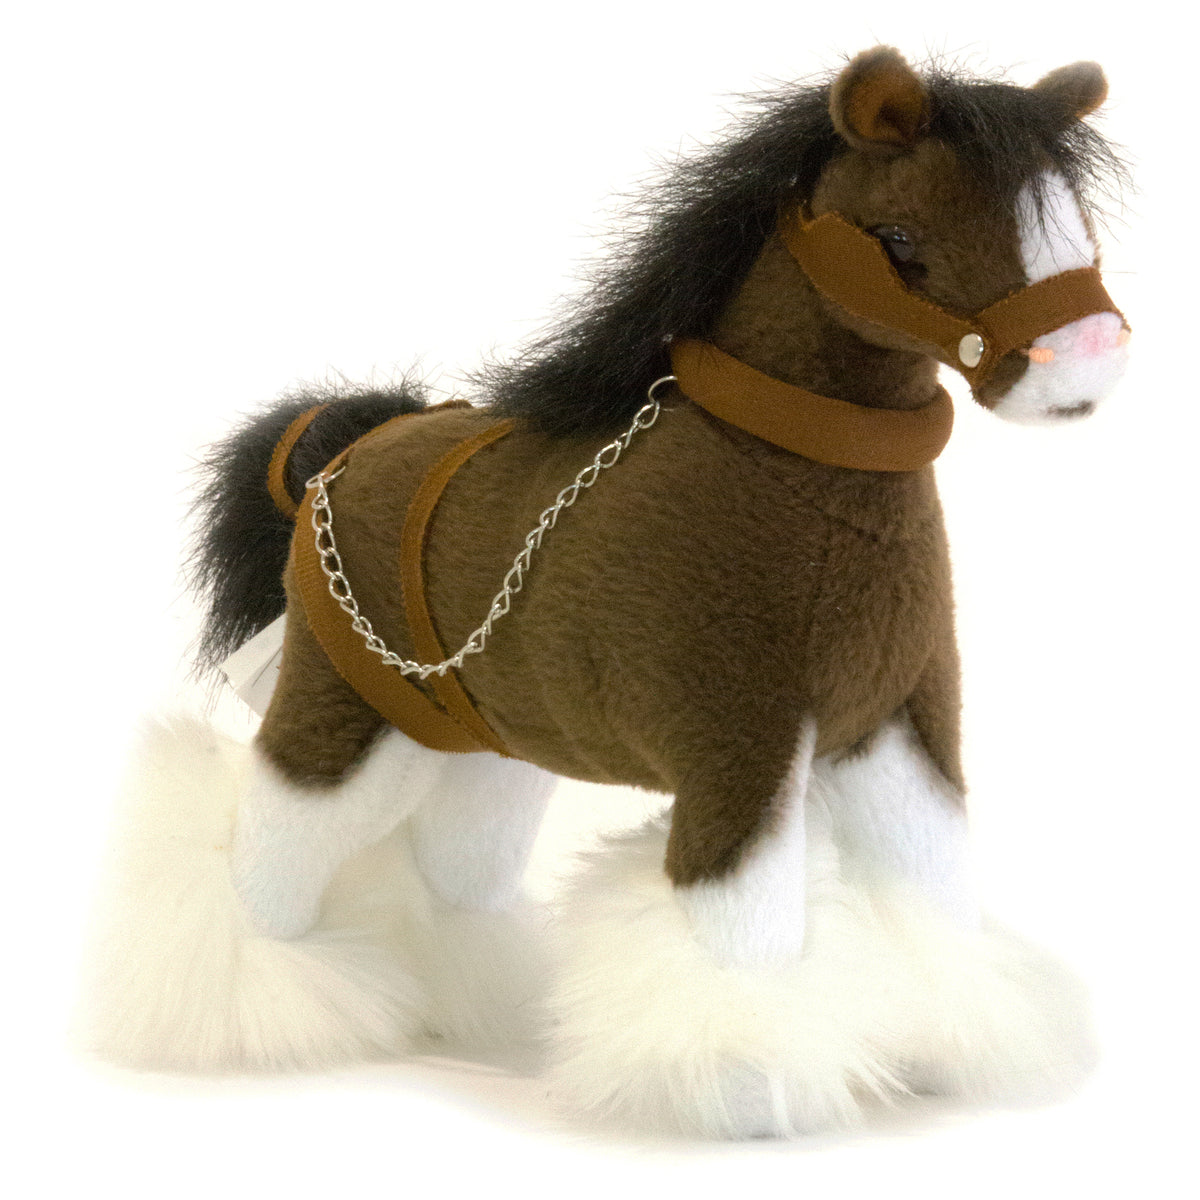 Boccetta Plush Toys Clyde the Clydesdale Horse